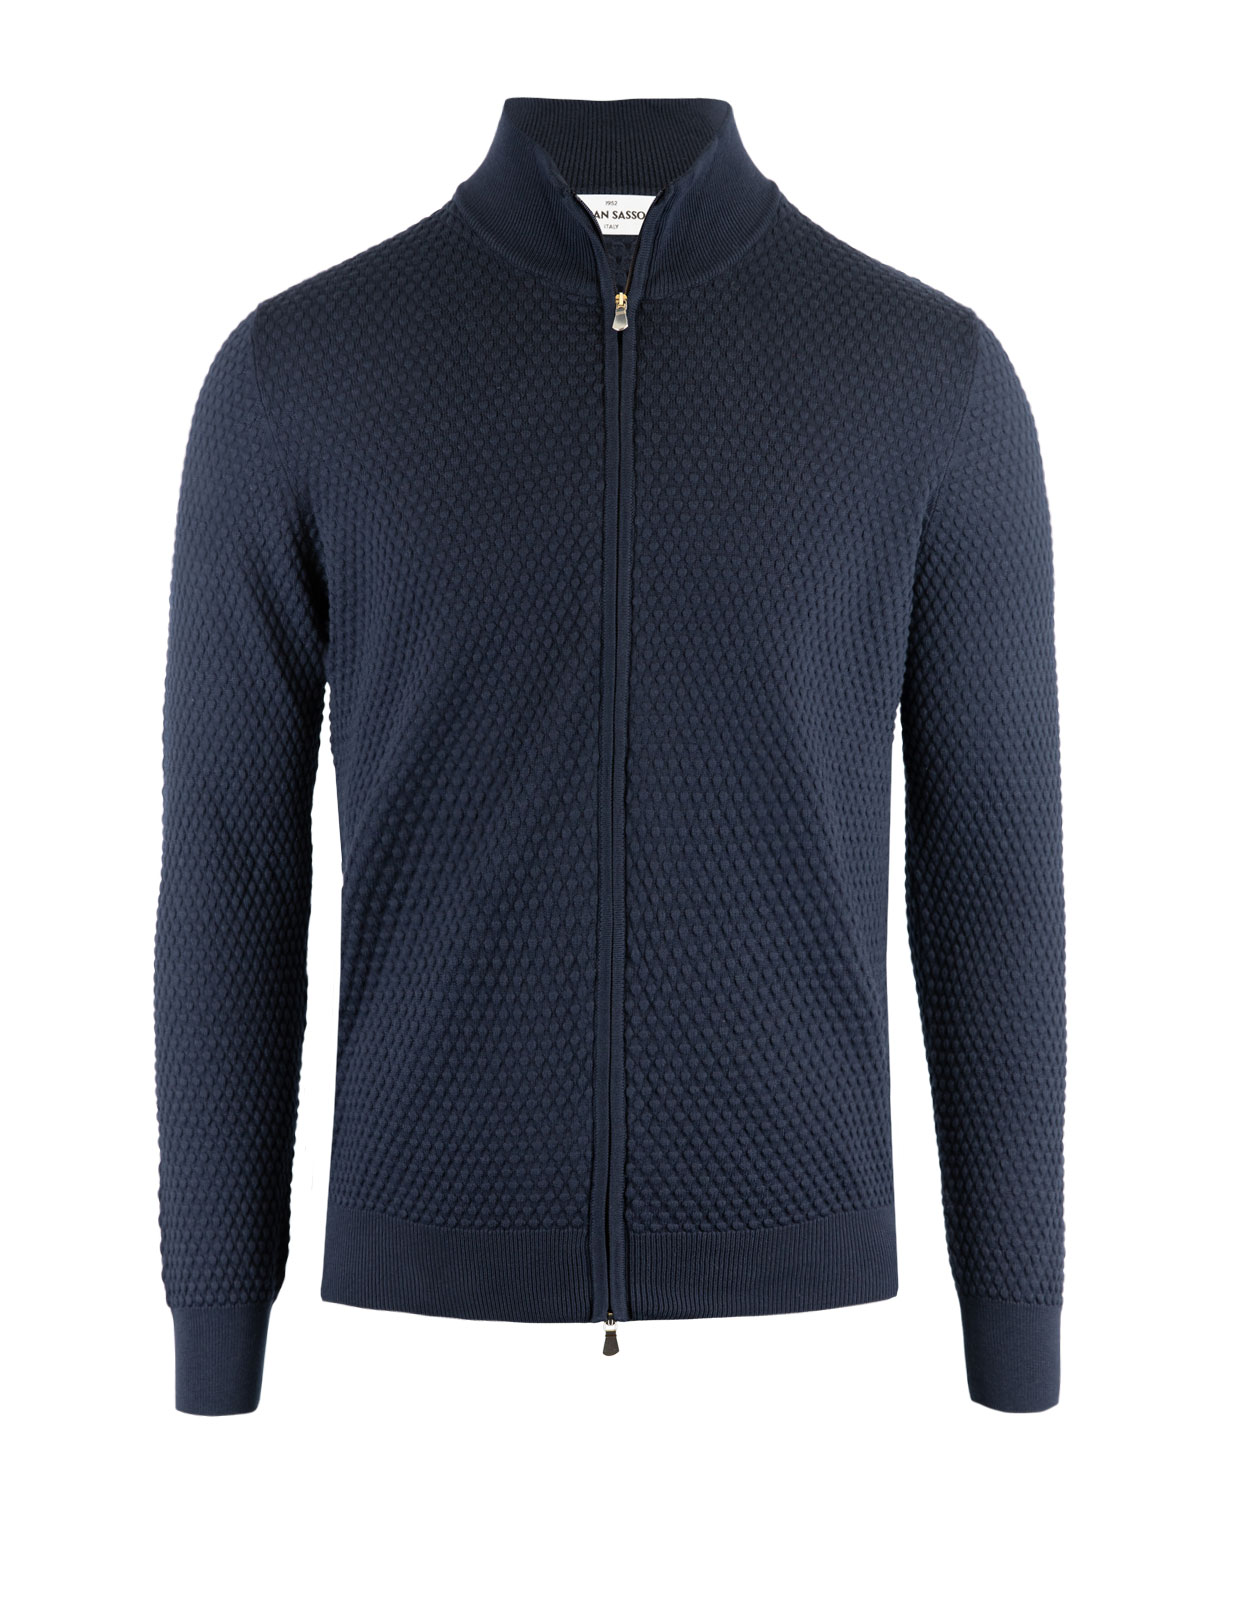 Full Zip Cardigan Structure Knitted Cotton Navy